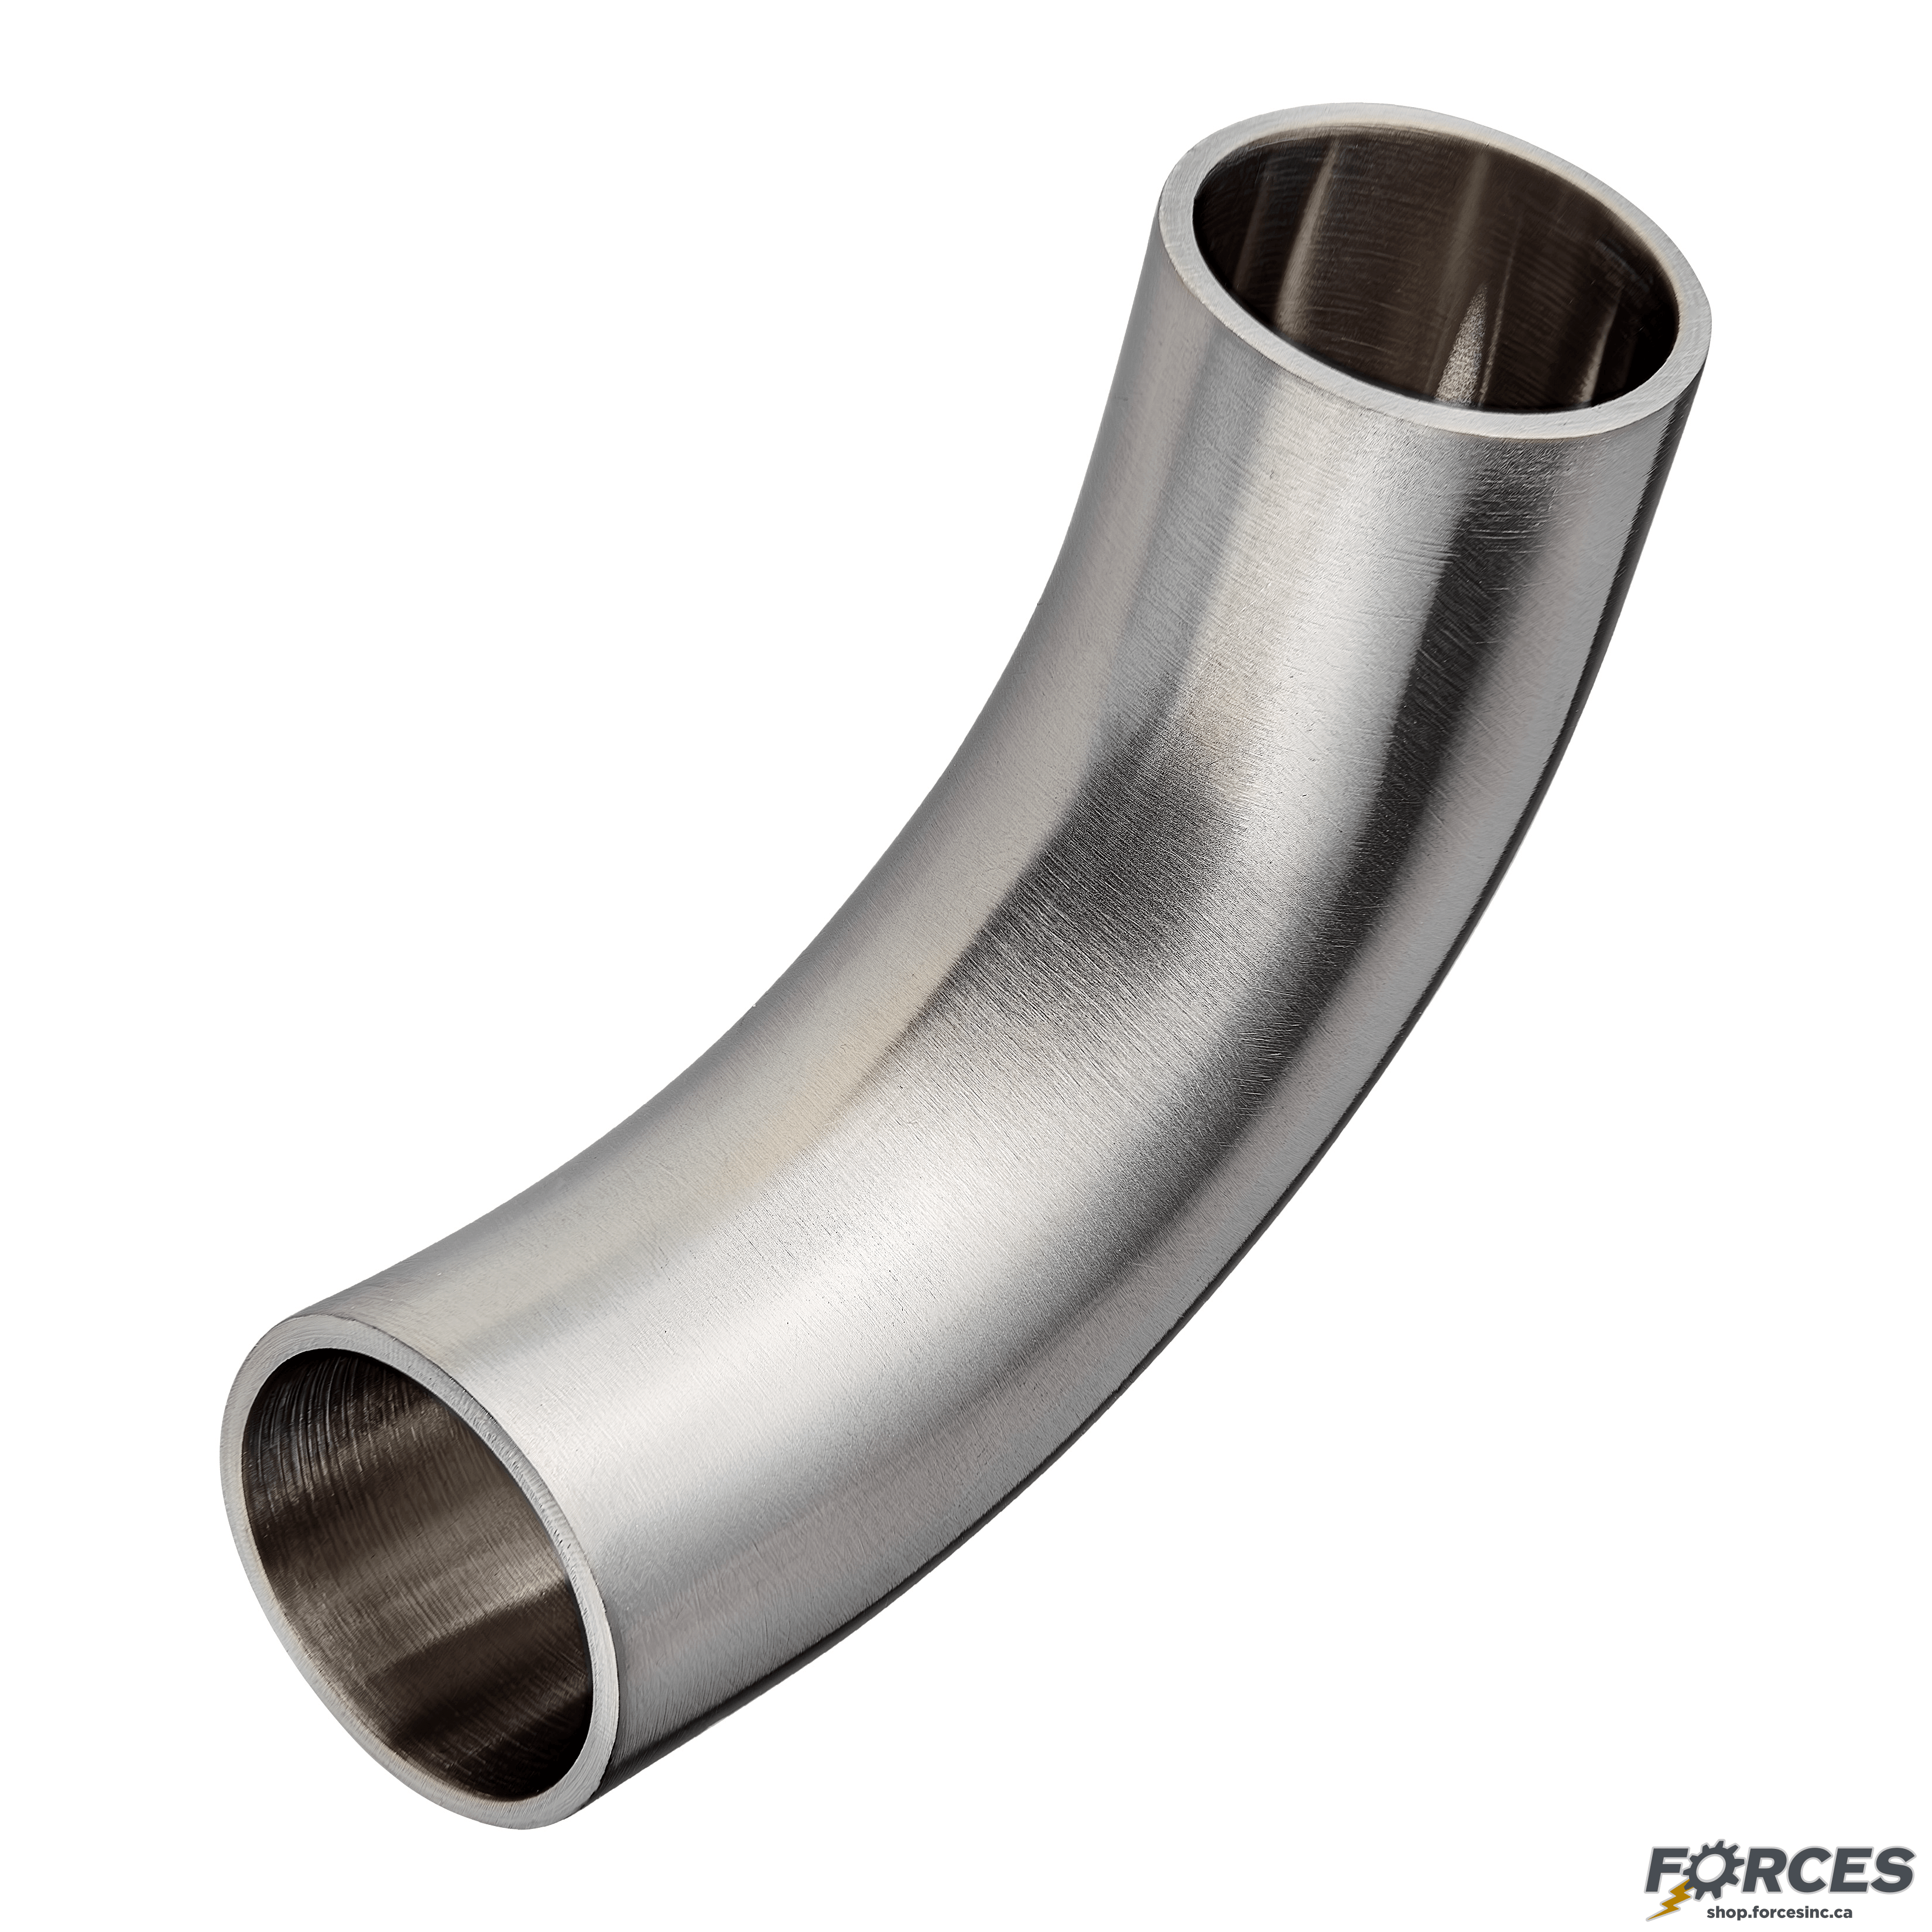 1-1/2" Butt Weld 90° Elbow Long Tangent - Stainless Steel 316 - Forces Inc